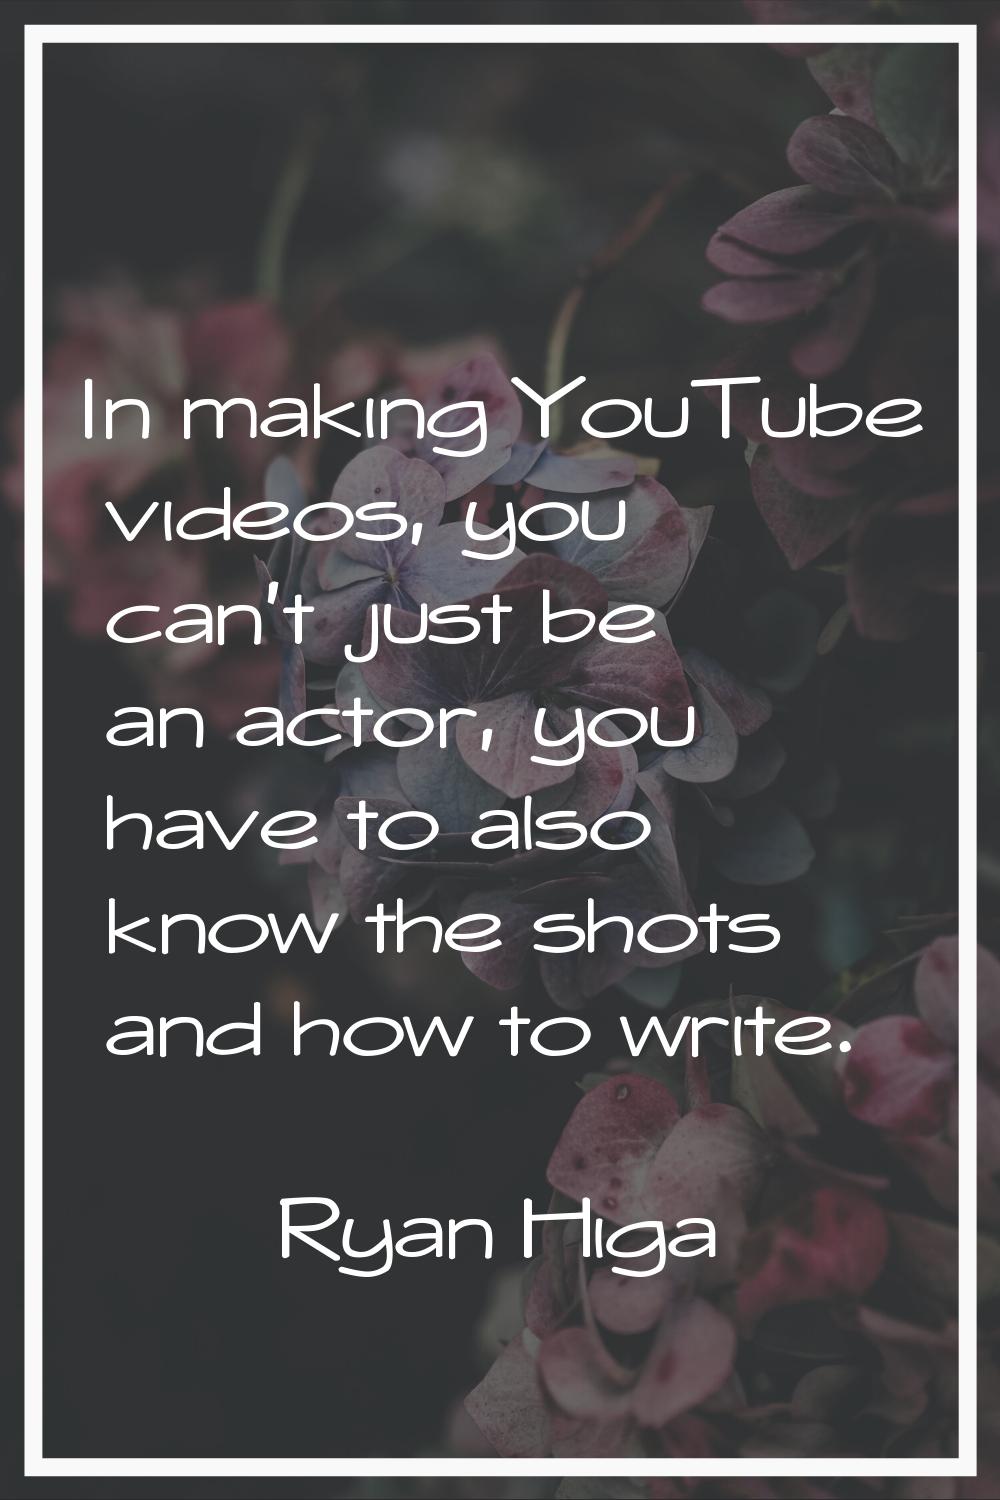 In making YouTube videos, you can't just be an actor, you have to also know the shots and how to wr